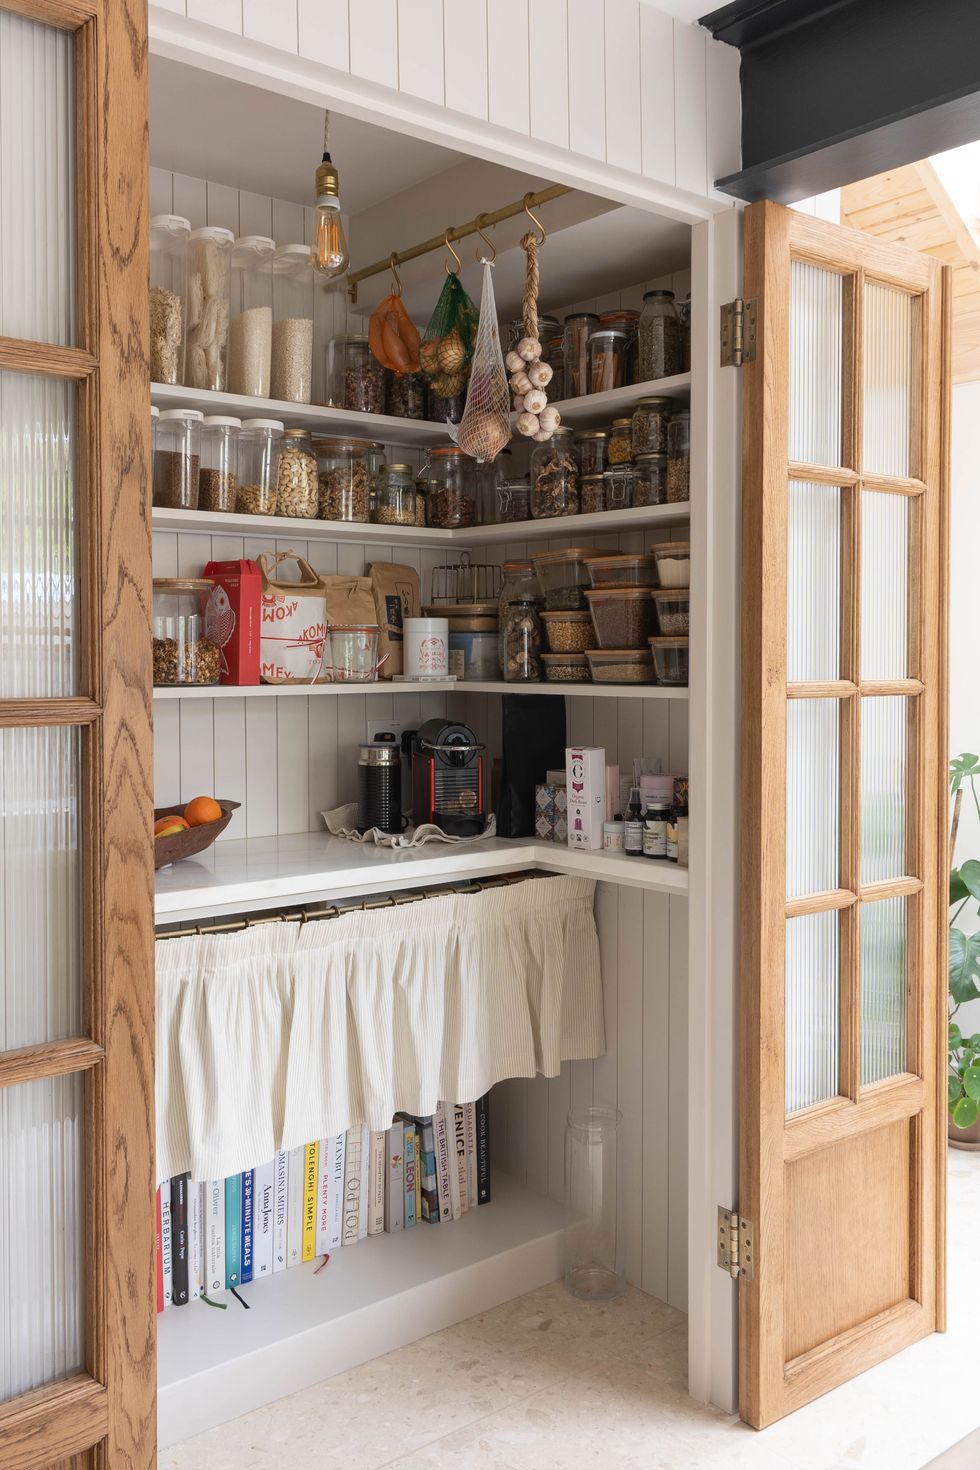 Luxury Pantry Storage Solutions for the Modern Kitchen